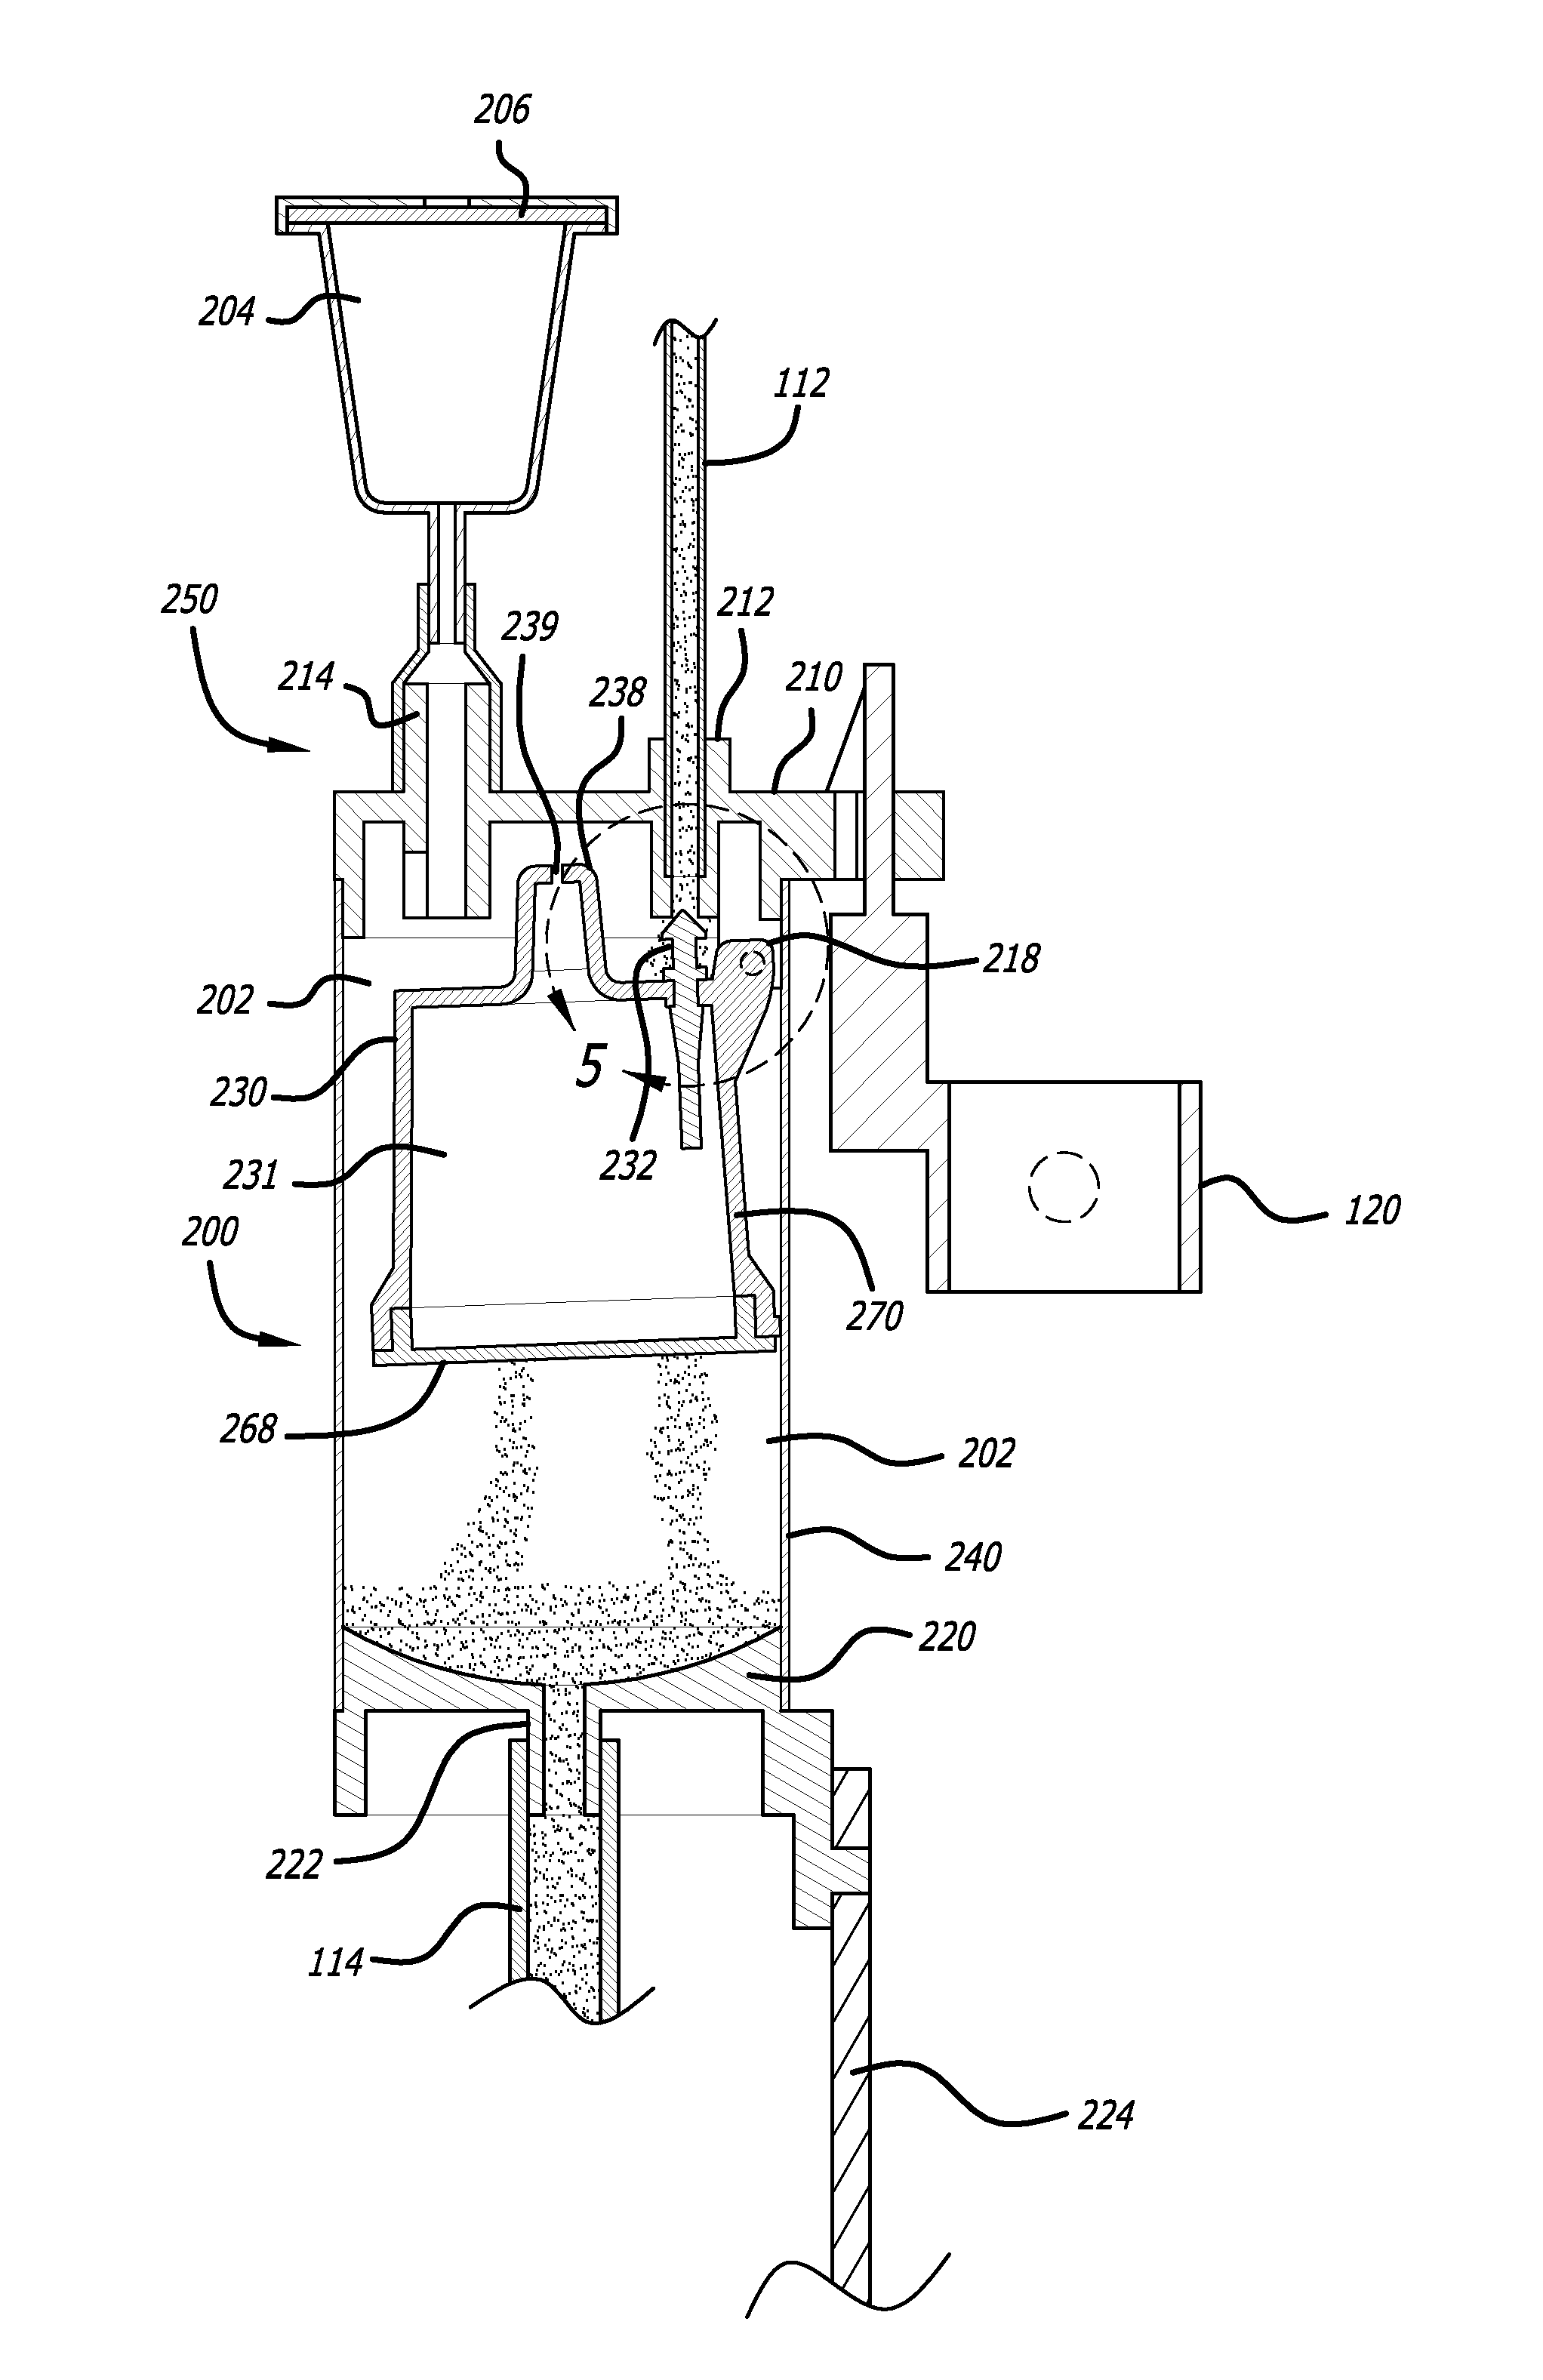 Volume limiting bodily fluid drainage system